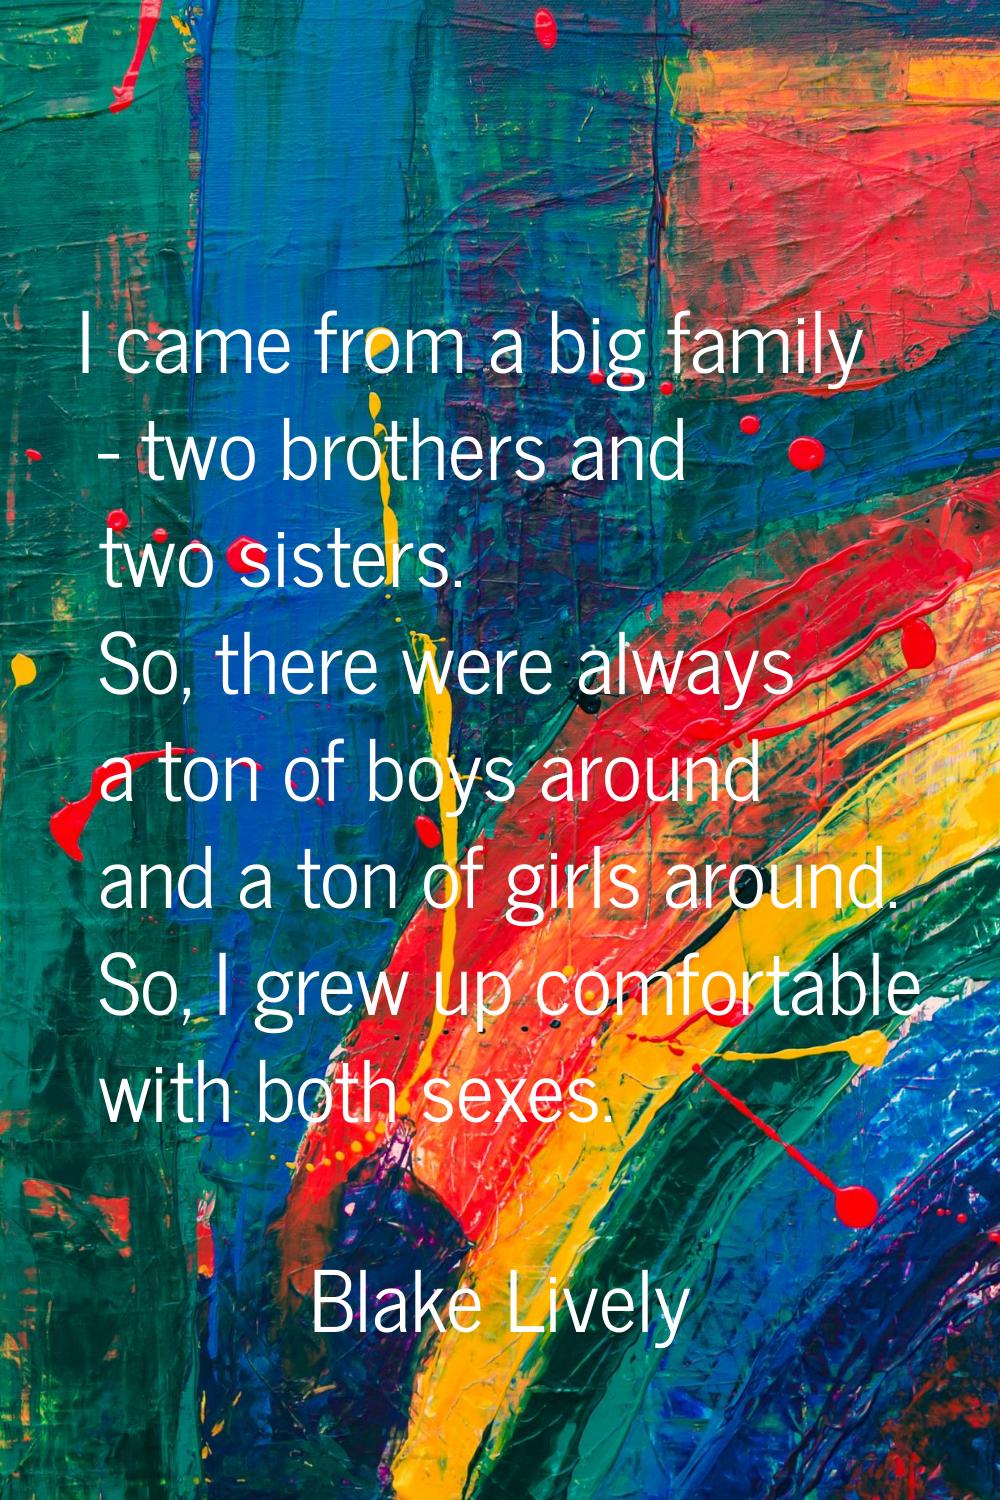 I came from a big family - two brothers and two sisters. So, there were always a ton of boys around